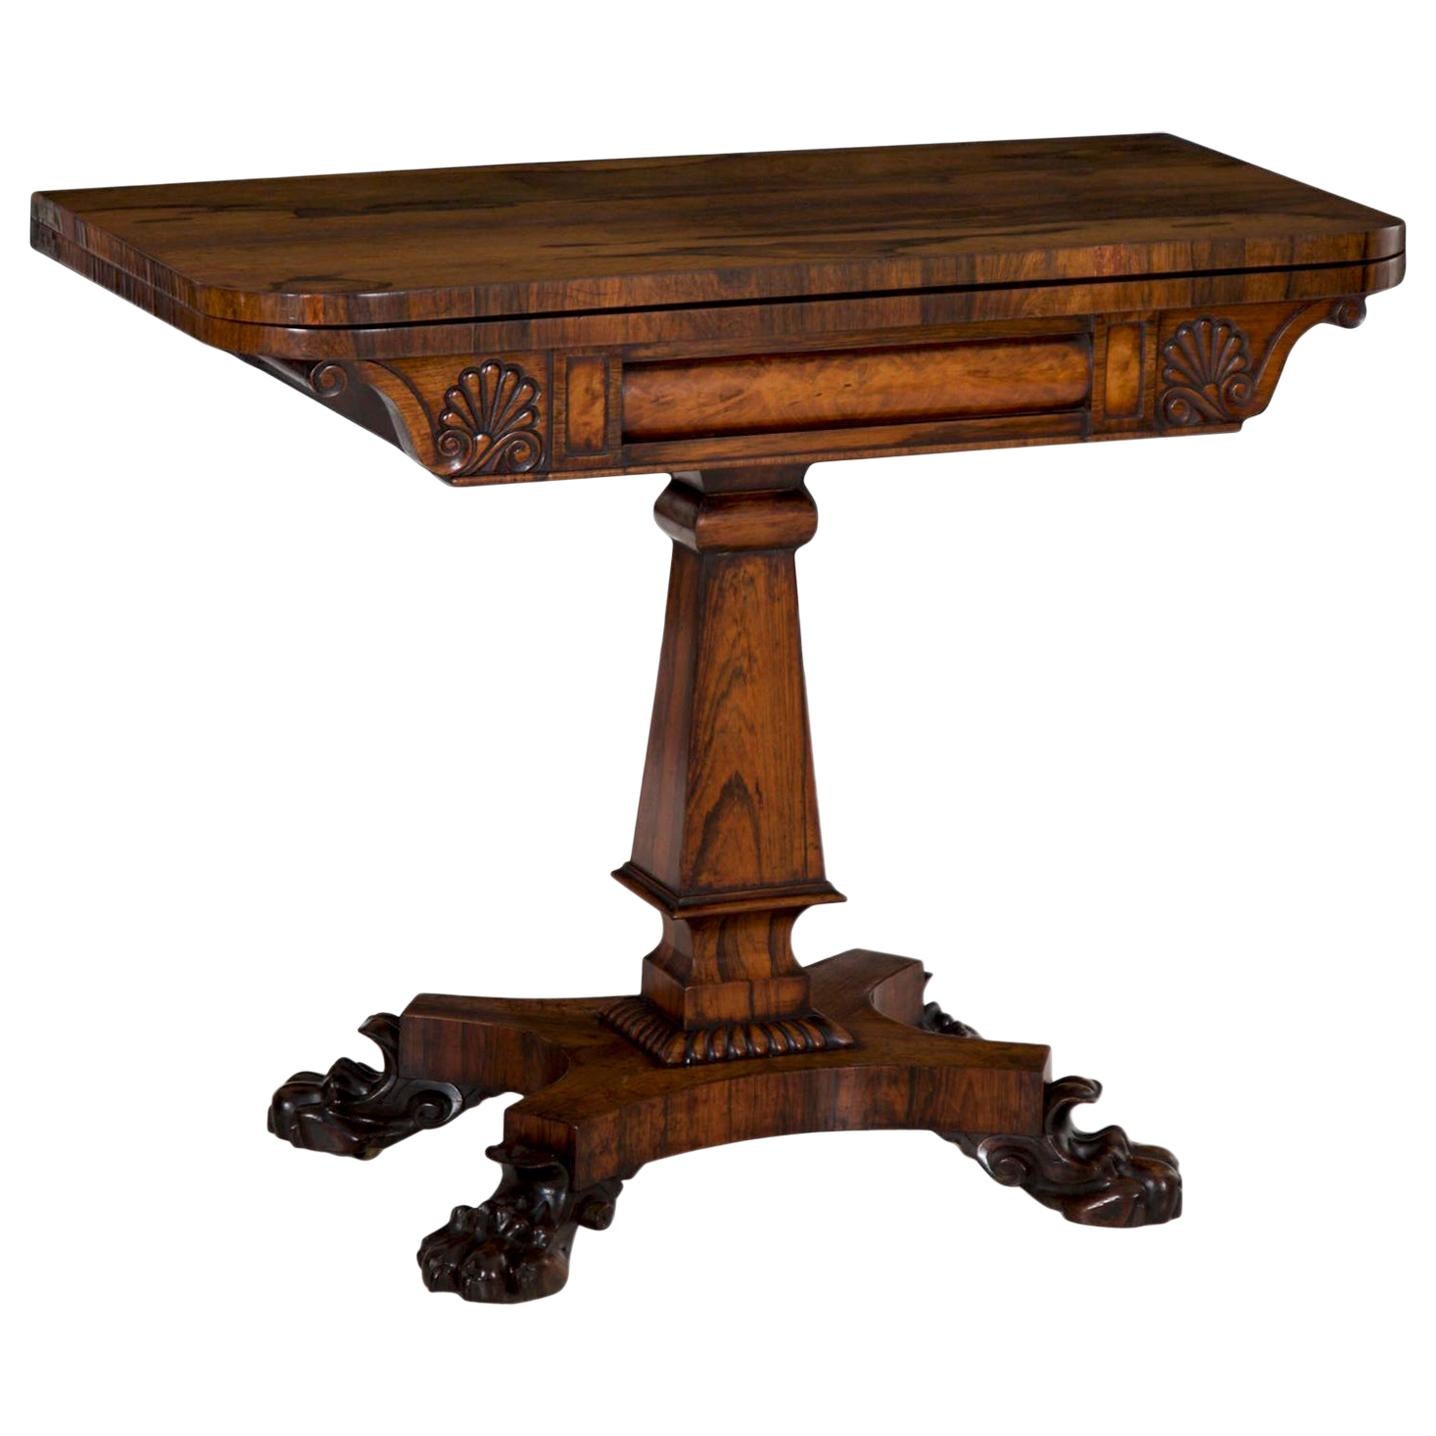 English Regency Antique Rosewood Carved Game Card Table, circa 1825